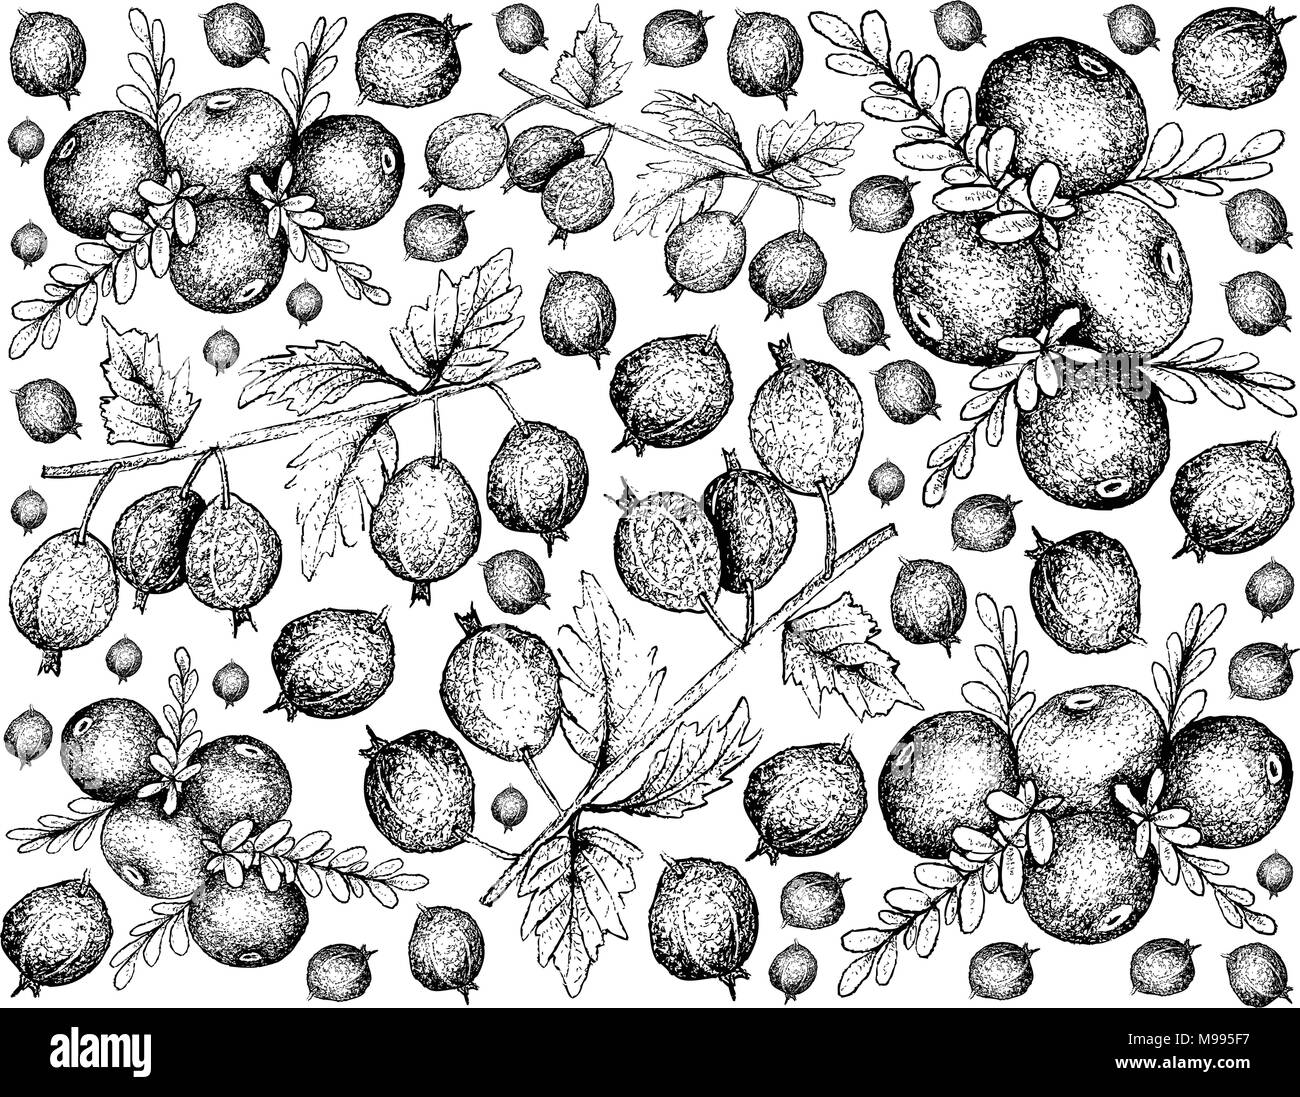 Berry Fruits, Illustration Wallpaper Background of Hand Drawn Sketch Fresh Black Velvet Gooseberry or Ribes Oxyacanthoides and Black Crowberry or Empe Stock Vector